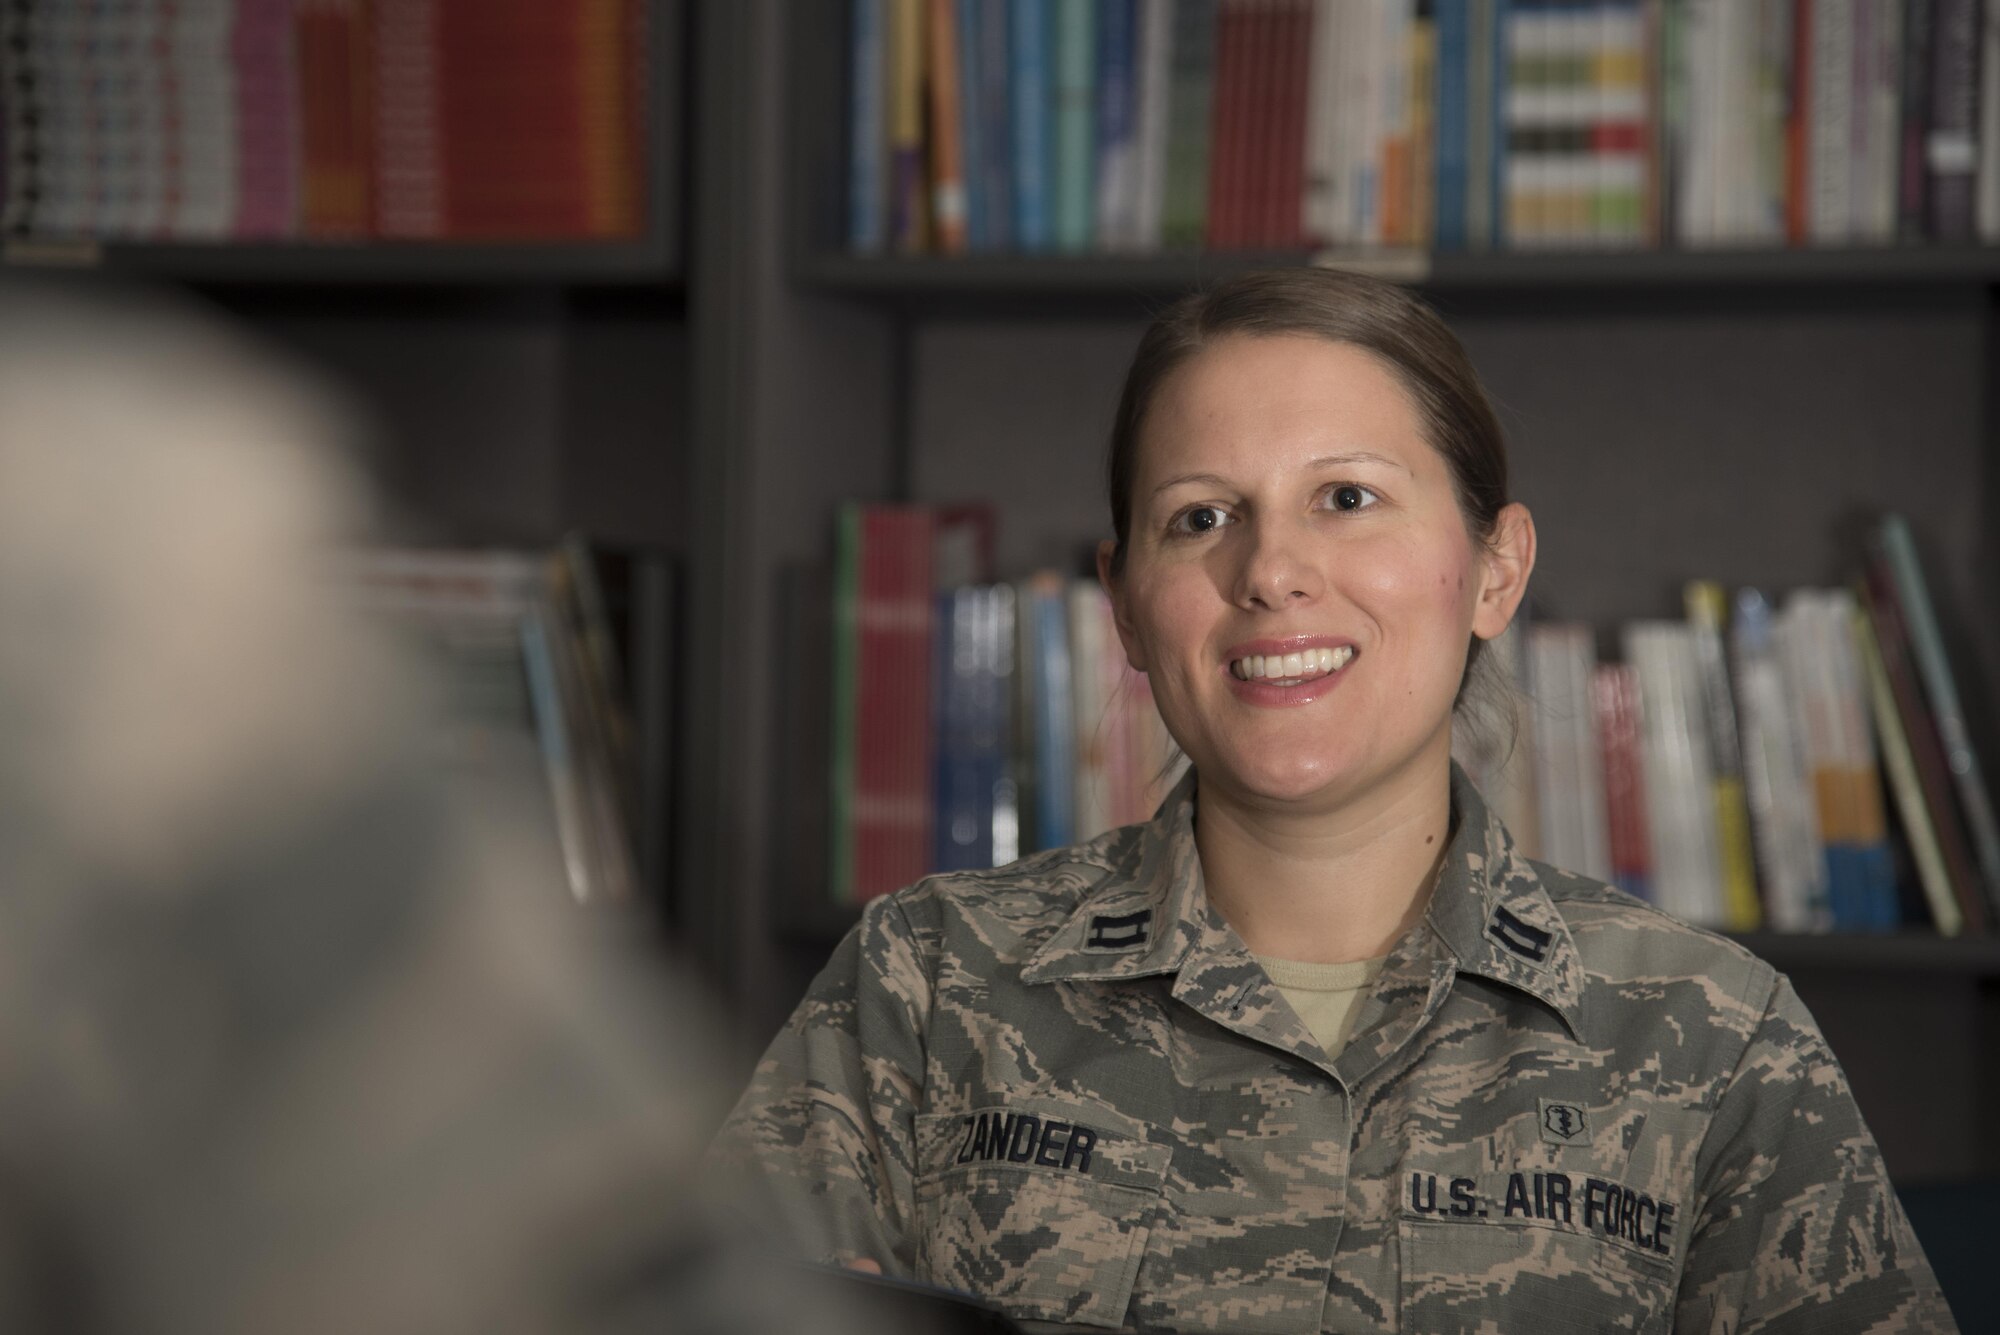 U.S. Air Force Capt. Mary Zander, a psychologist with the 35th MEdical Operations Squadron, remembers her siblings in the military as she speaks to a patient at Misawa Air Base, Japan, Nov. 3, 2016. Zander said whenever she thinks about experiences her sibling may go through, it drives her to be the best mental health provider she can be. (U.S. Air Force photo illustration by Airman 1st Class Sadie Colbert)